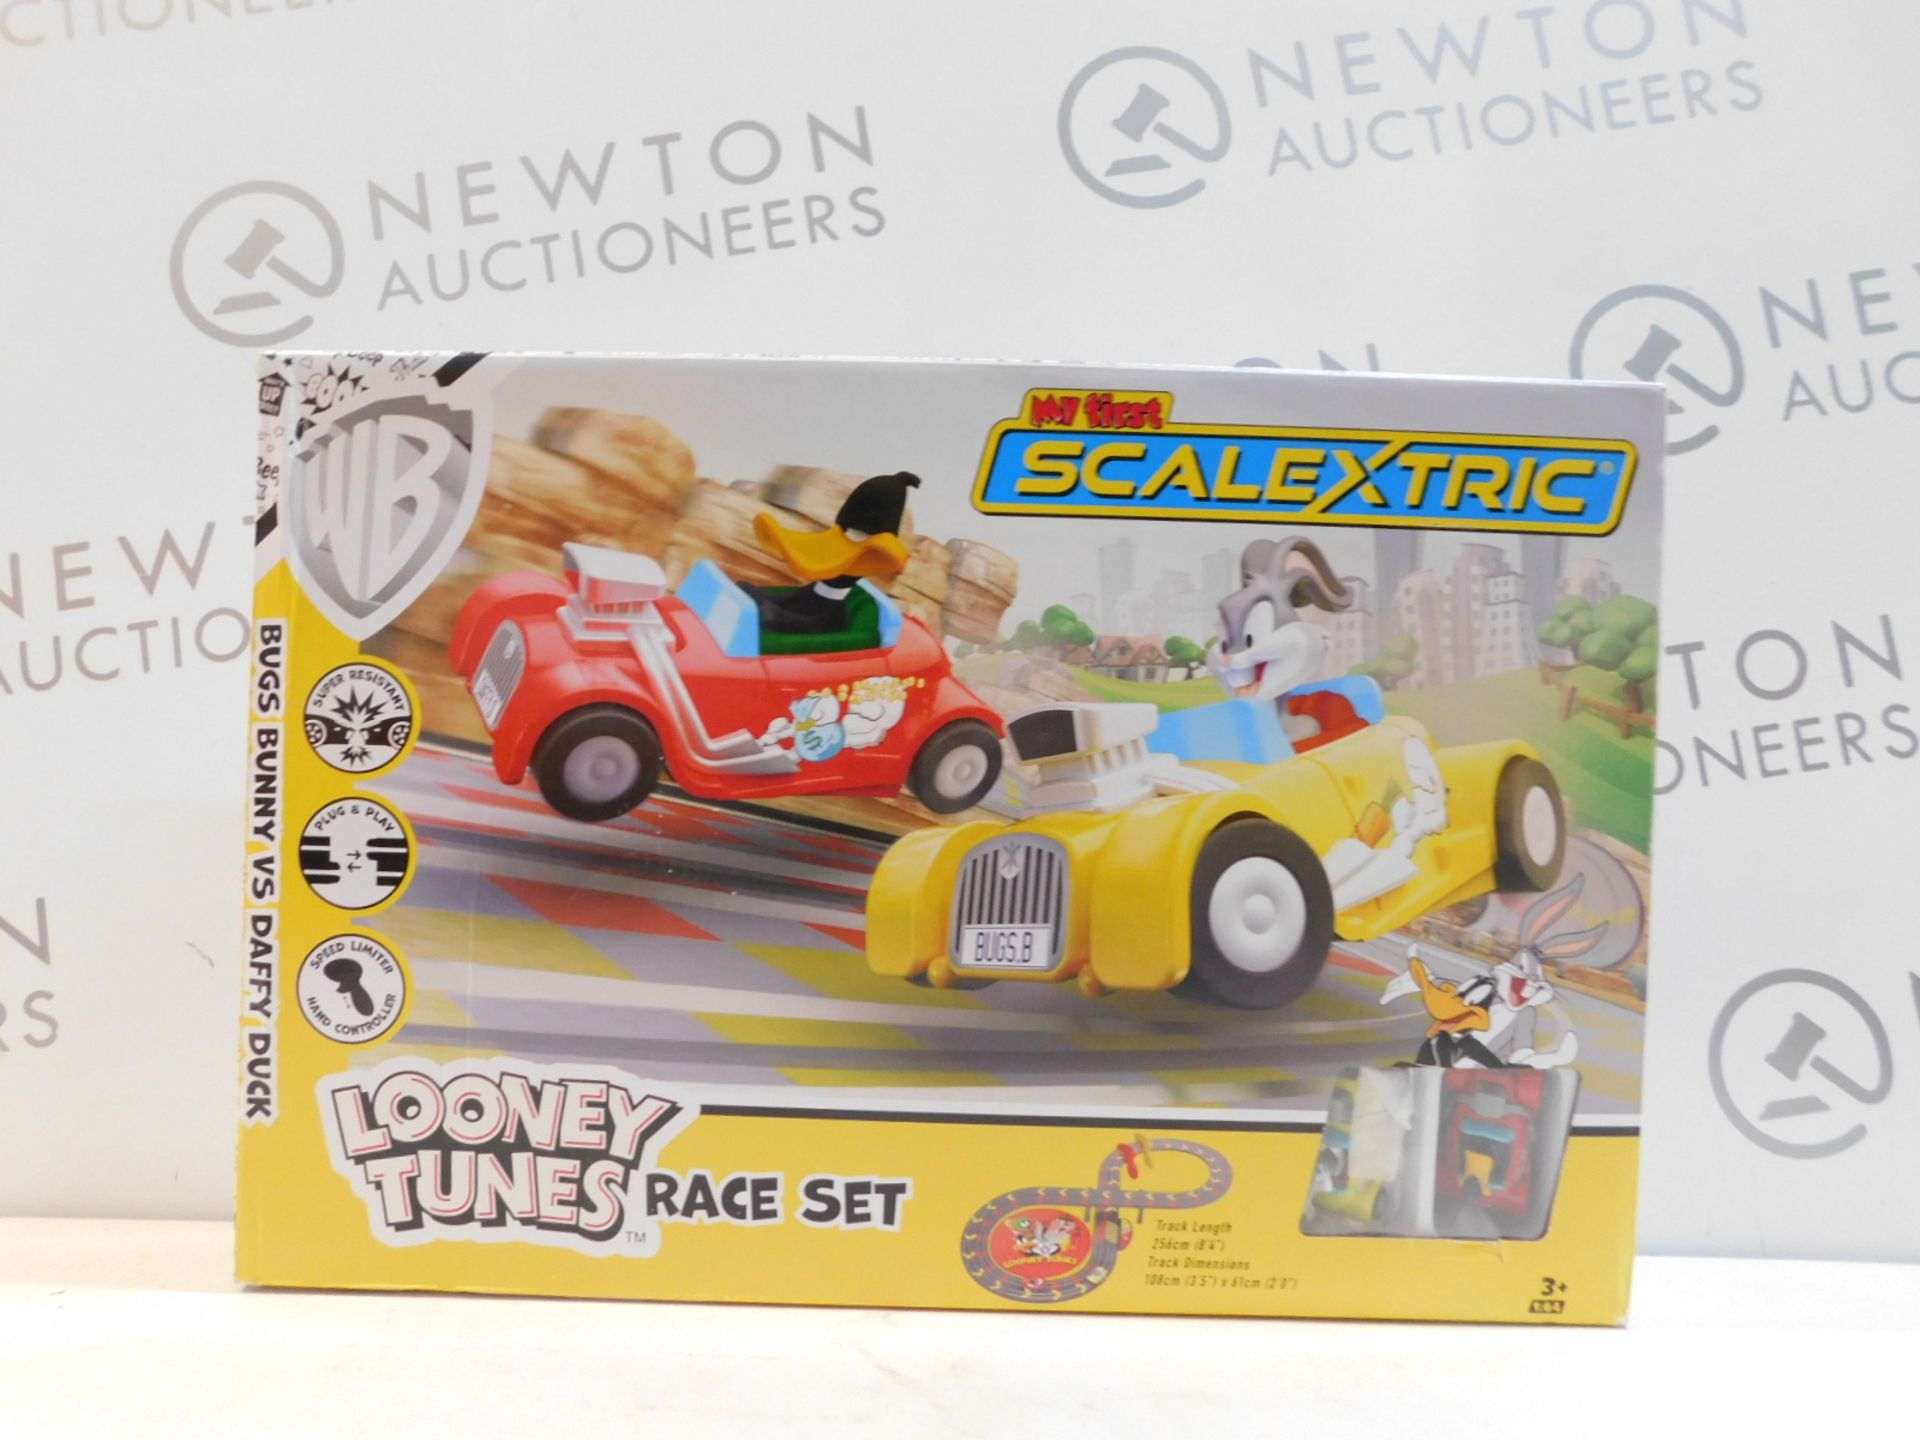 1 BOXED MY FIRST MICRO SCALEXTRIC LOONEY TUNES SLOT RACING SET RRP Â£49.99